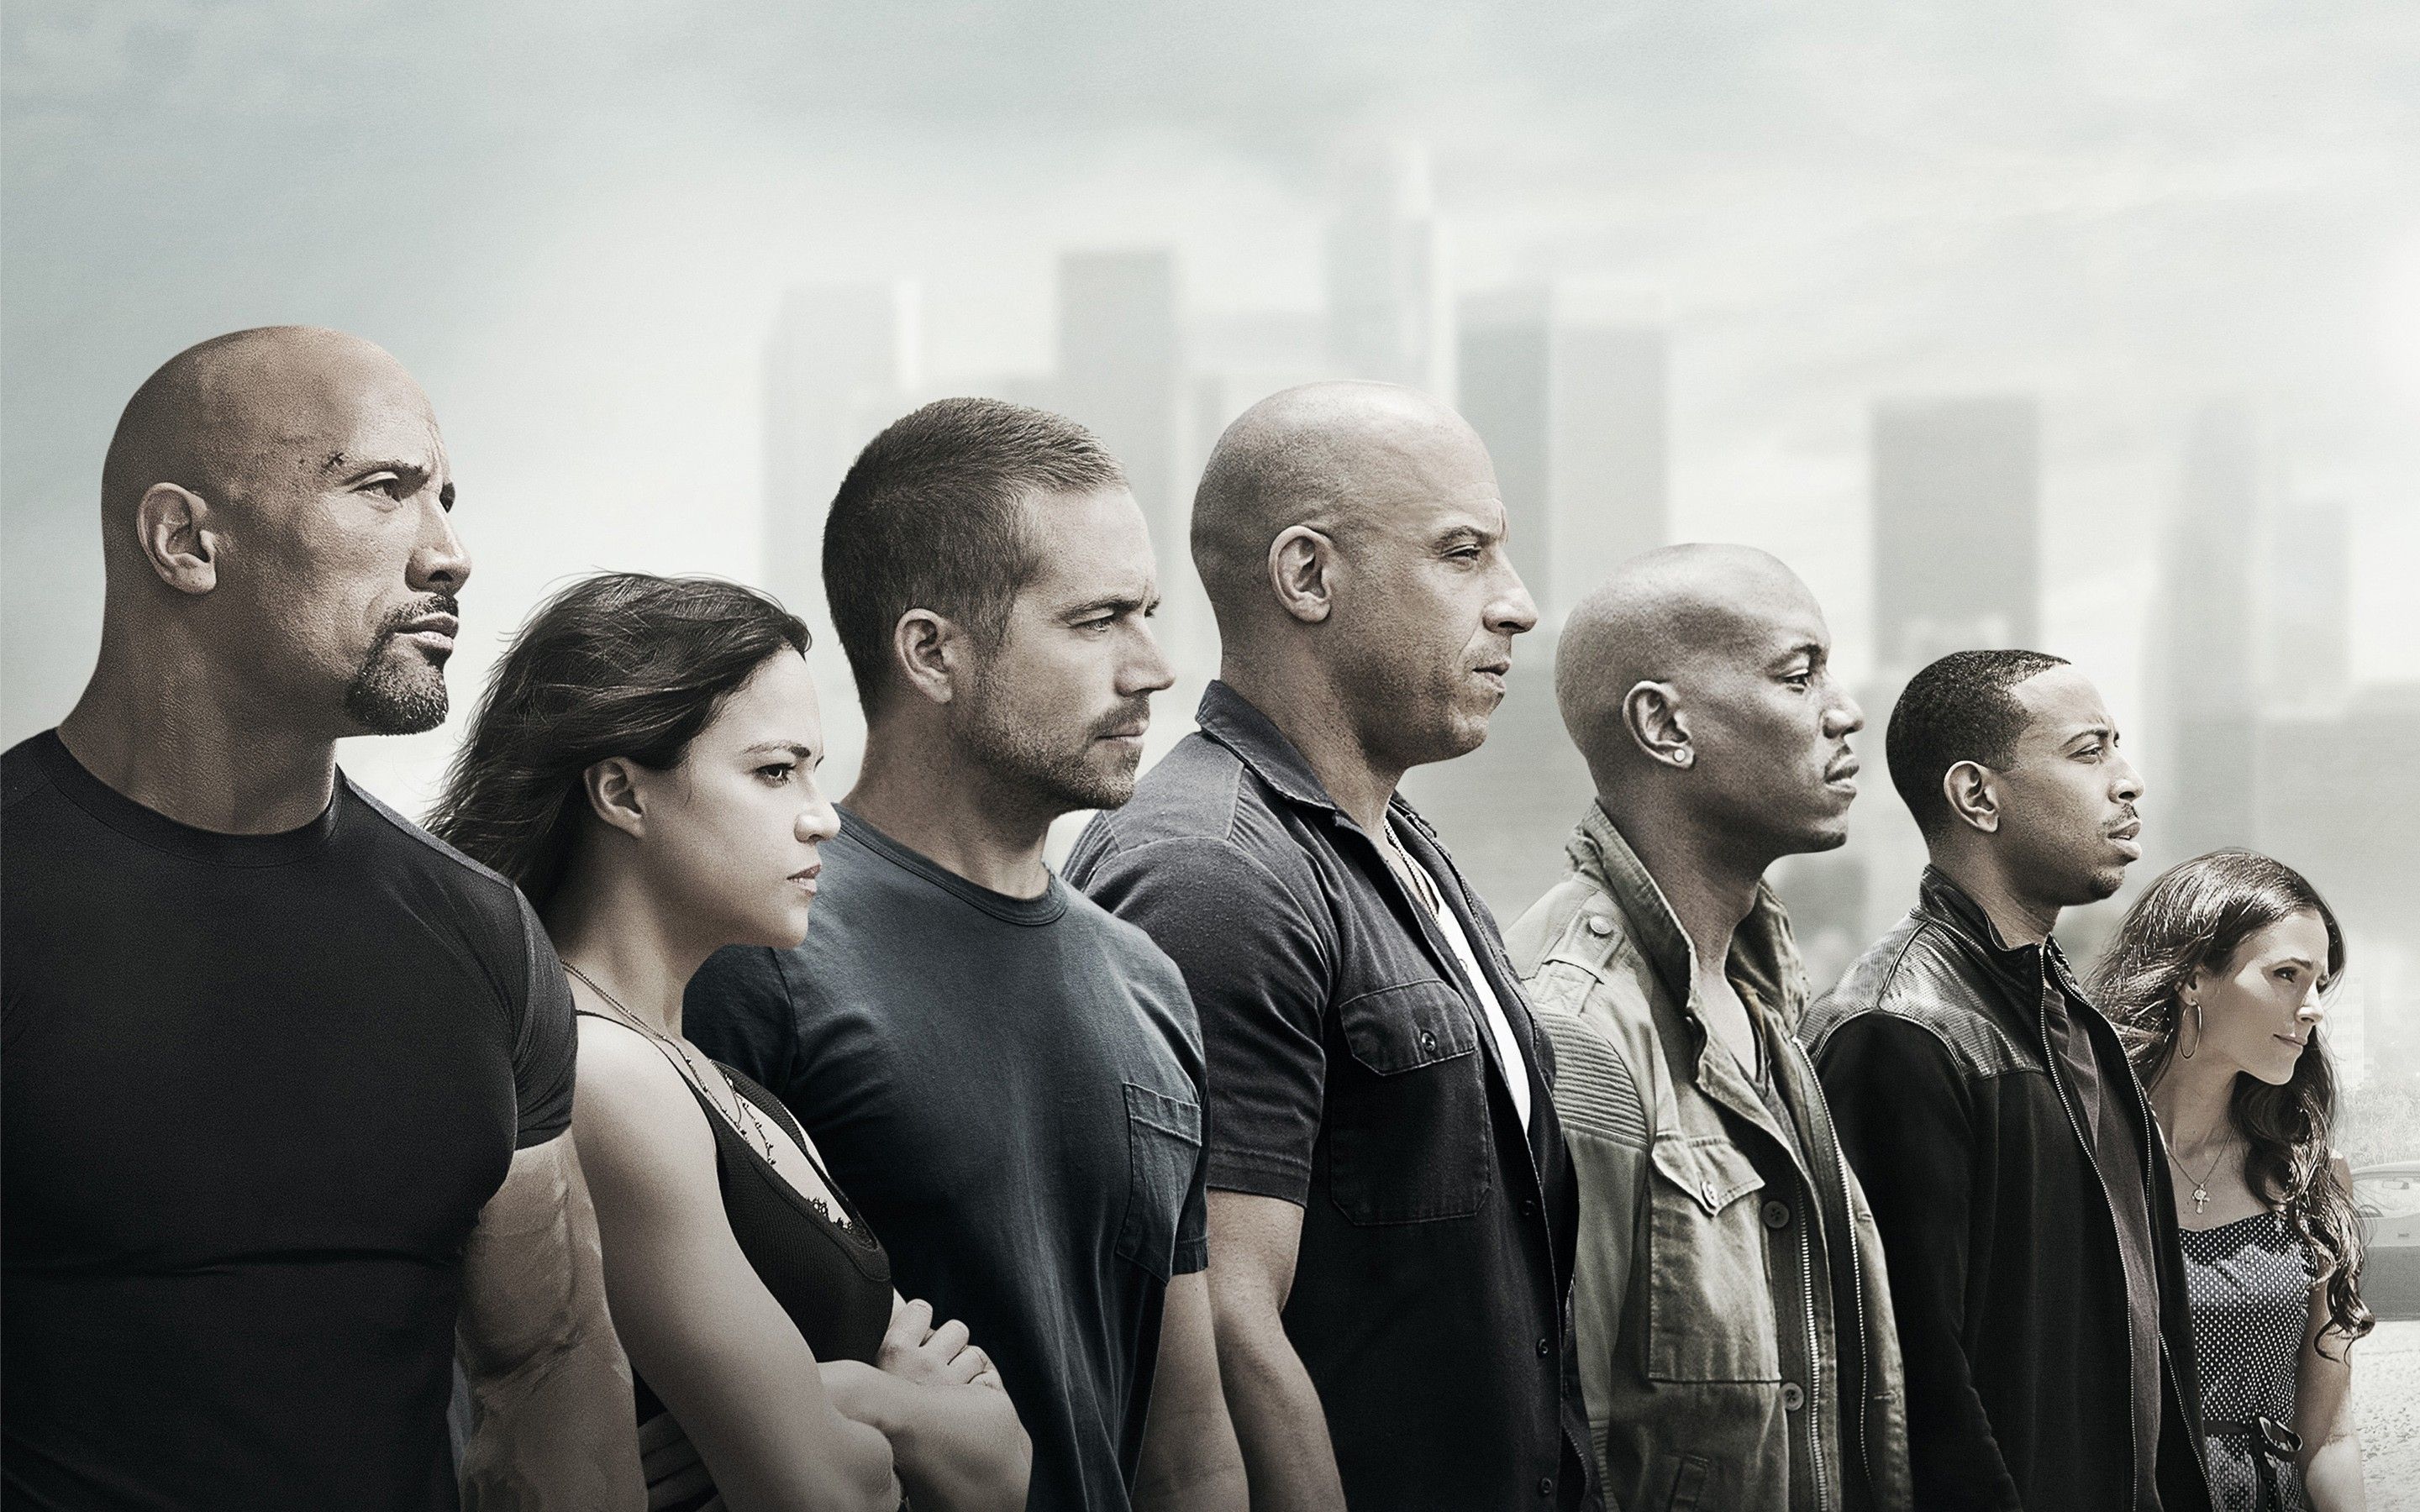 fast and furious «